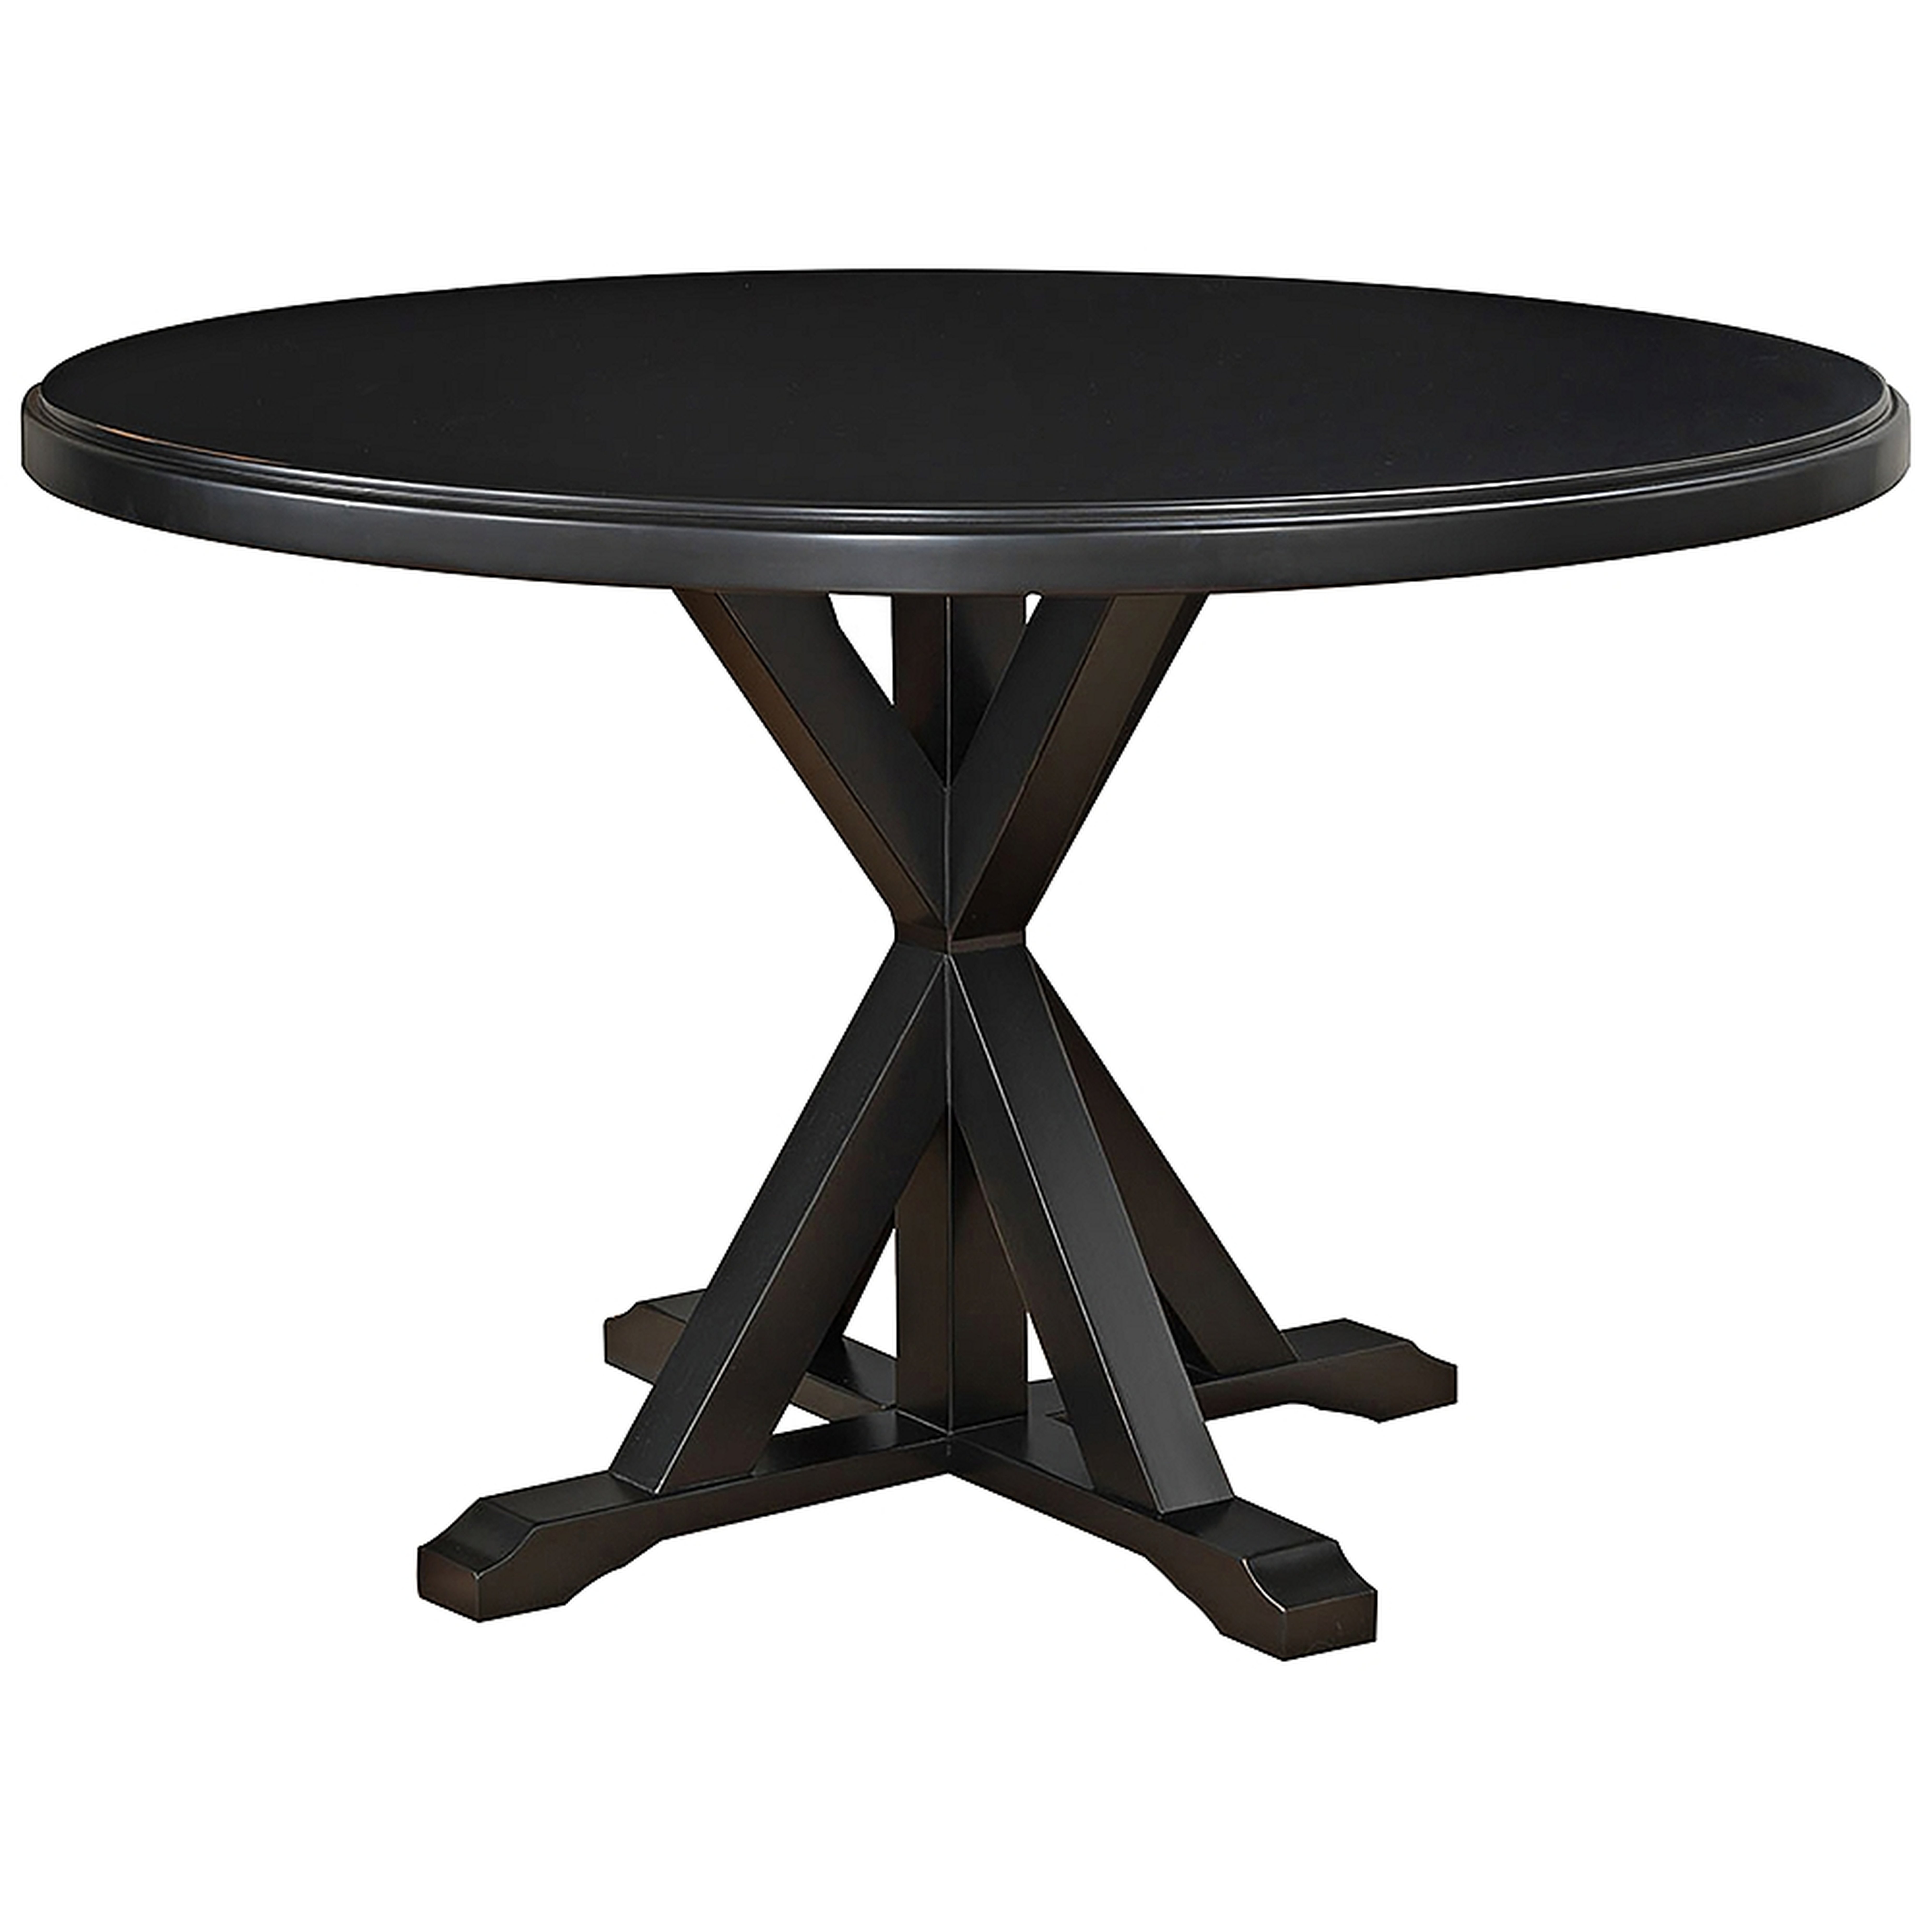 Rembrandt 48" Wide Antique Black Wood Round Dining Table - Style # 37R94 - Lamps Plus